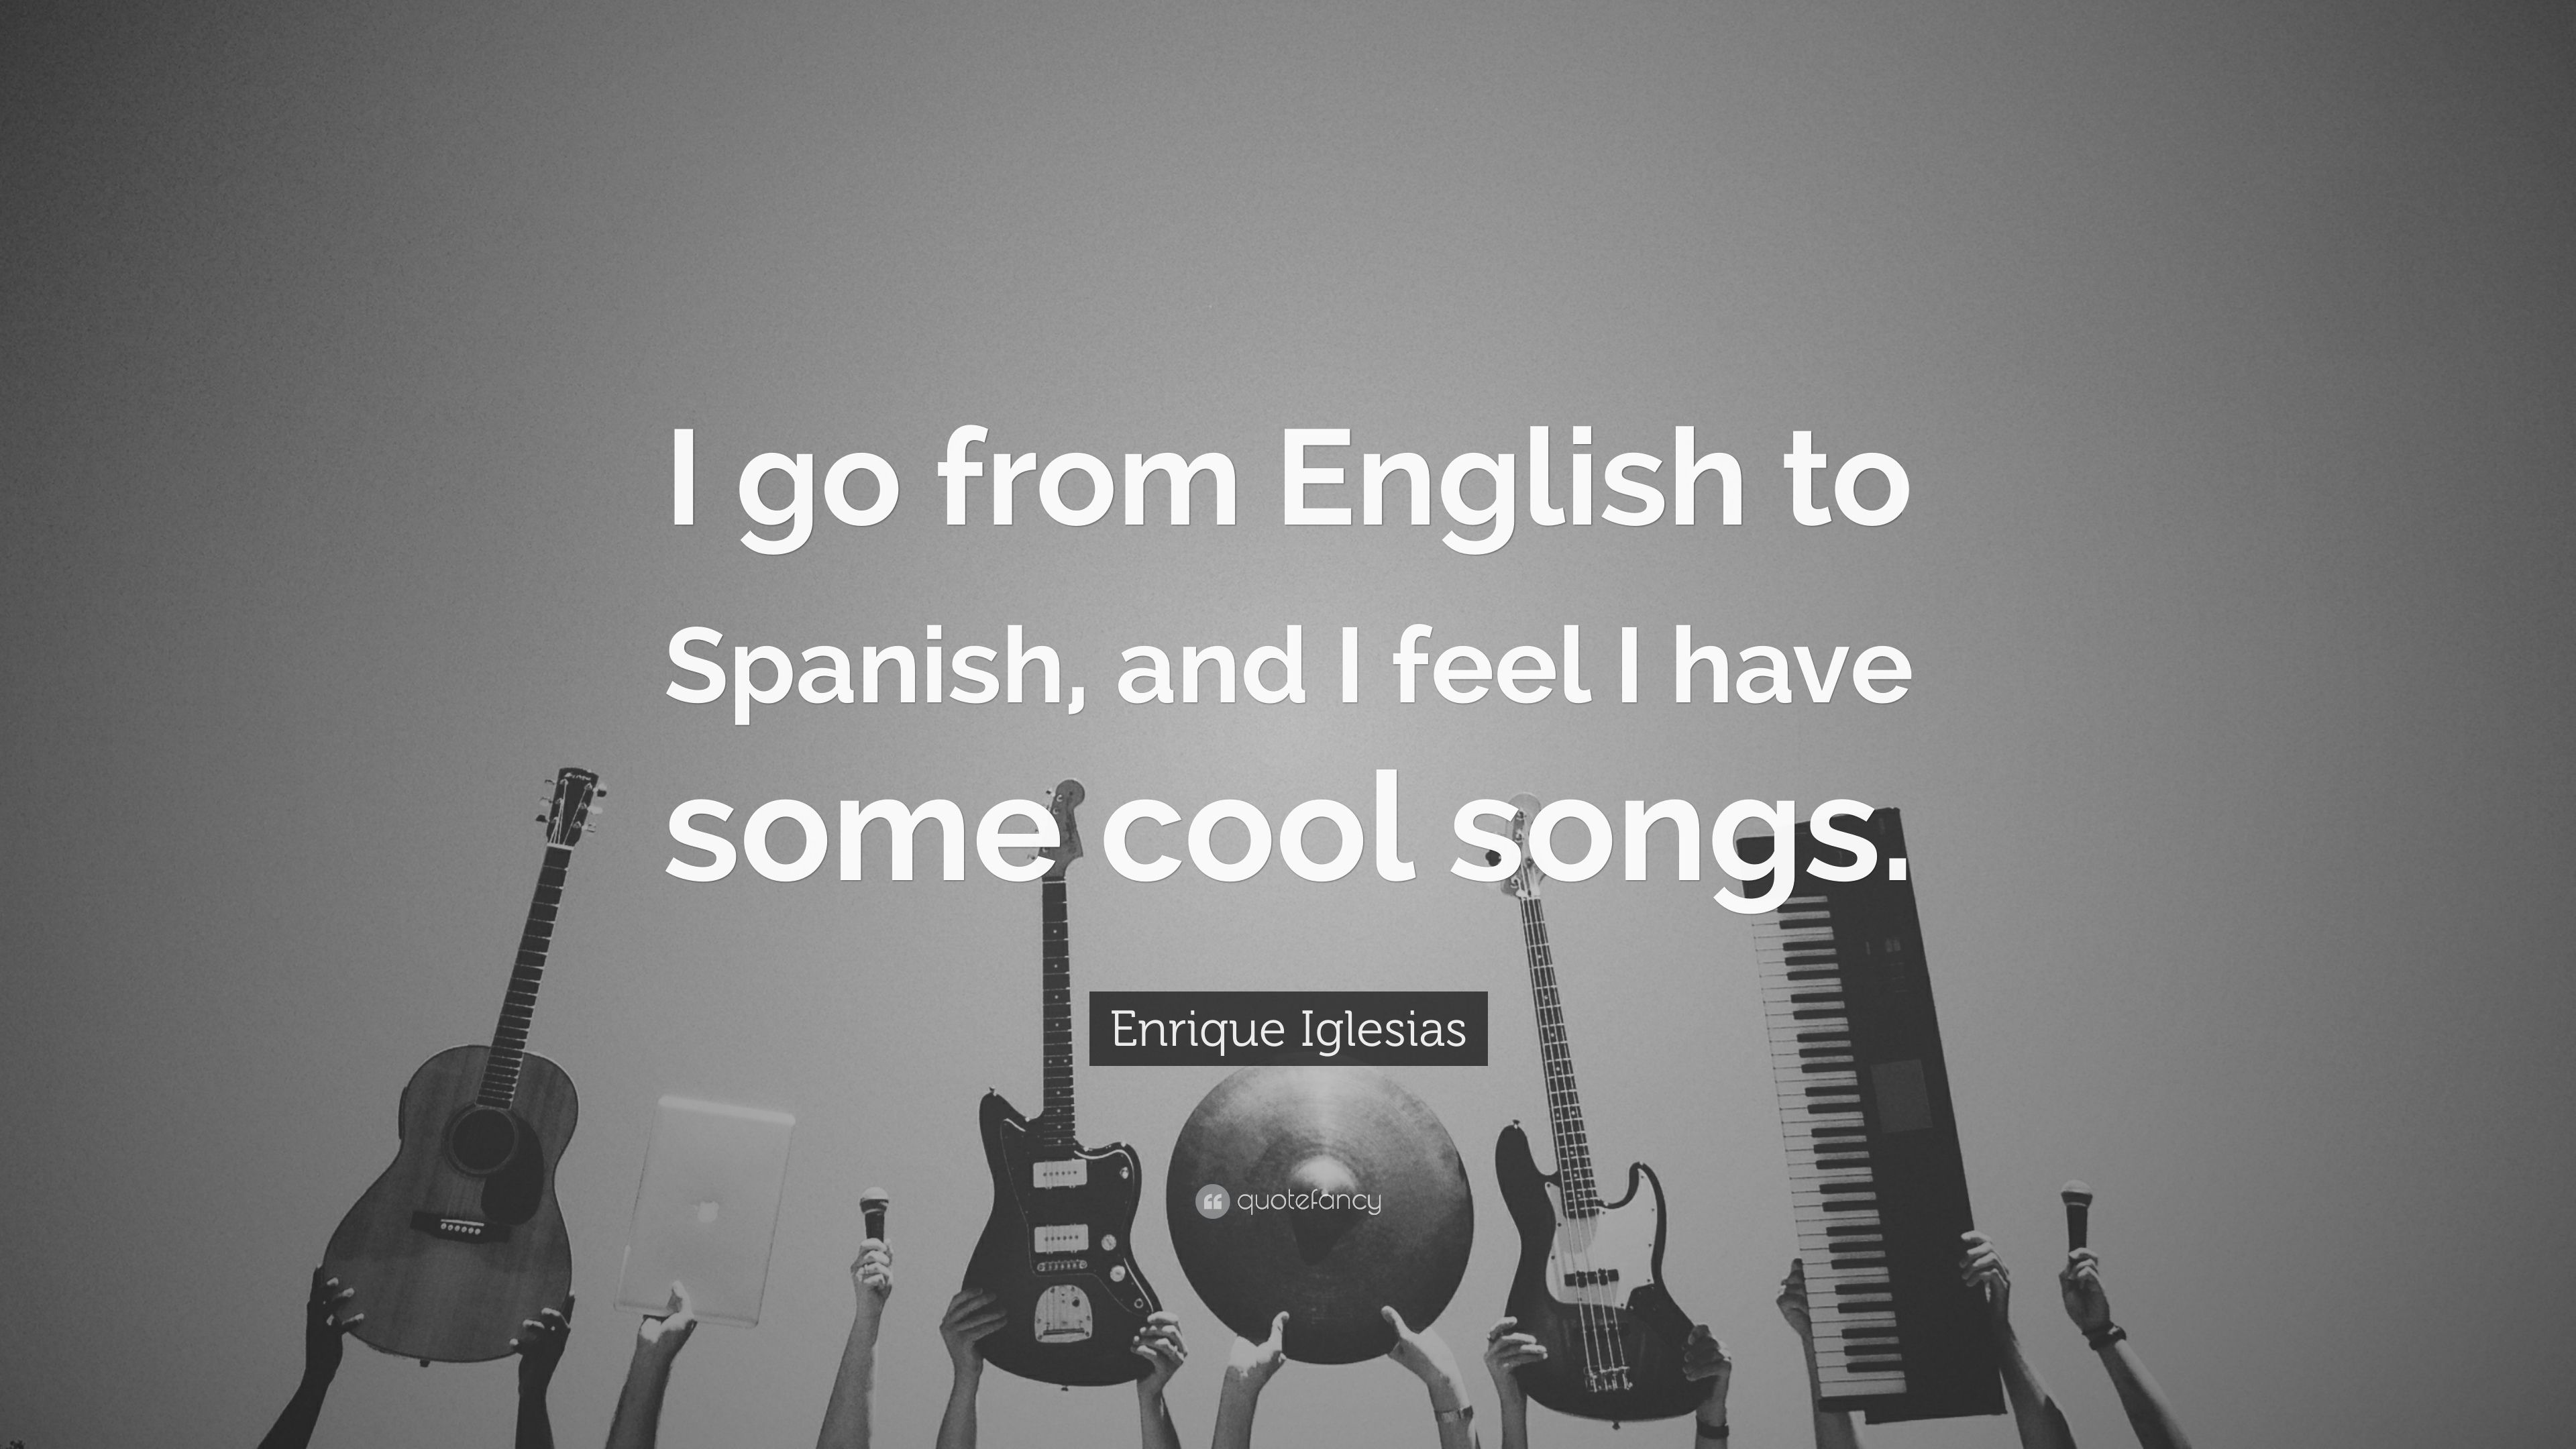 Enrique Iglesias Quote: “I go from English to Spanish, and I feel I have some cool songs.” (7 wallpaper)